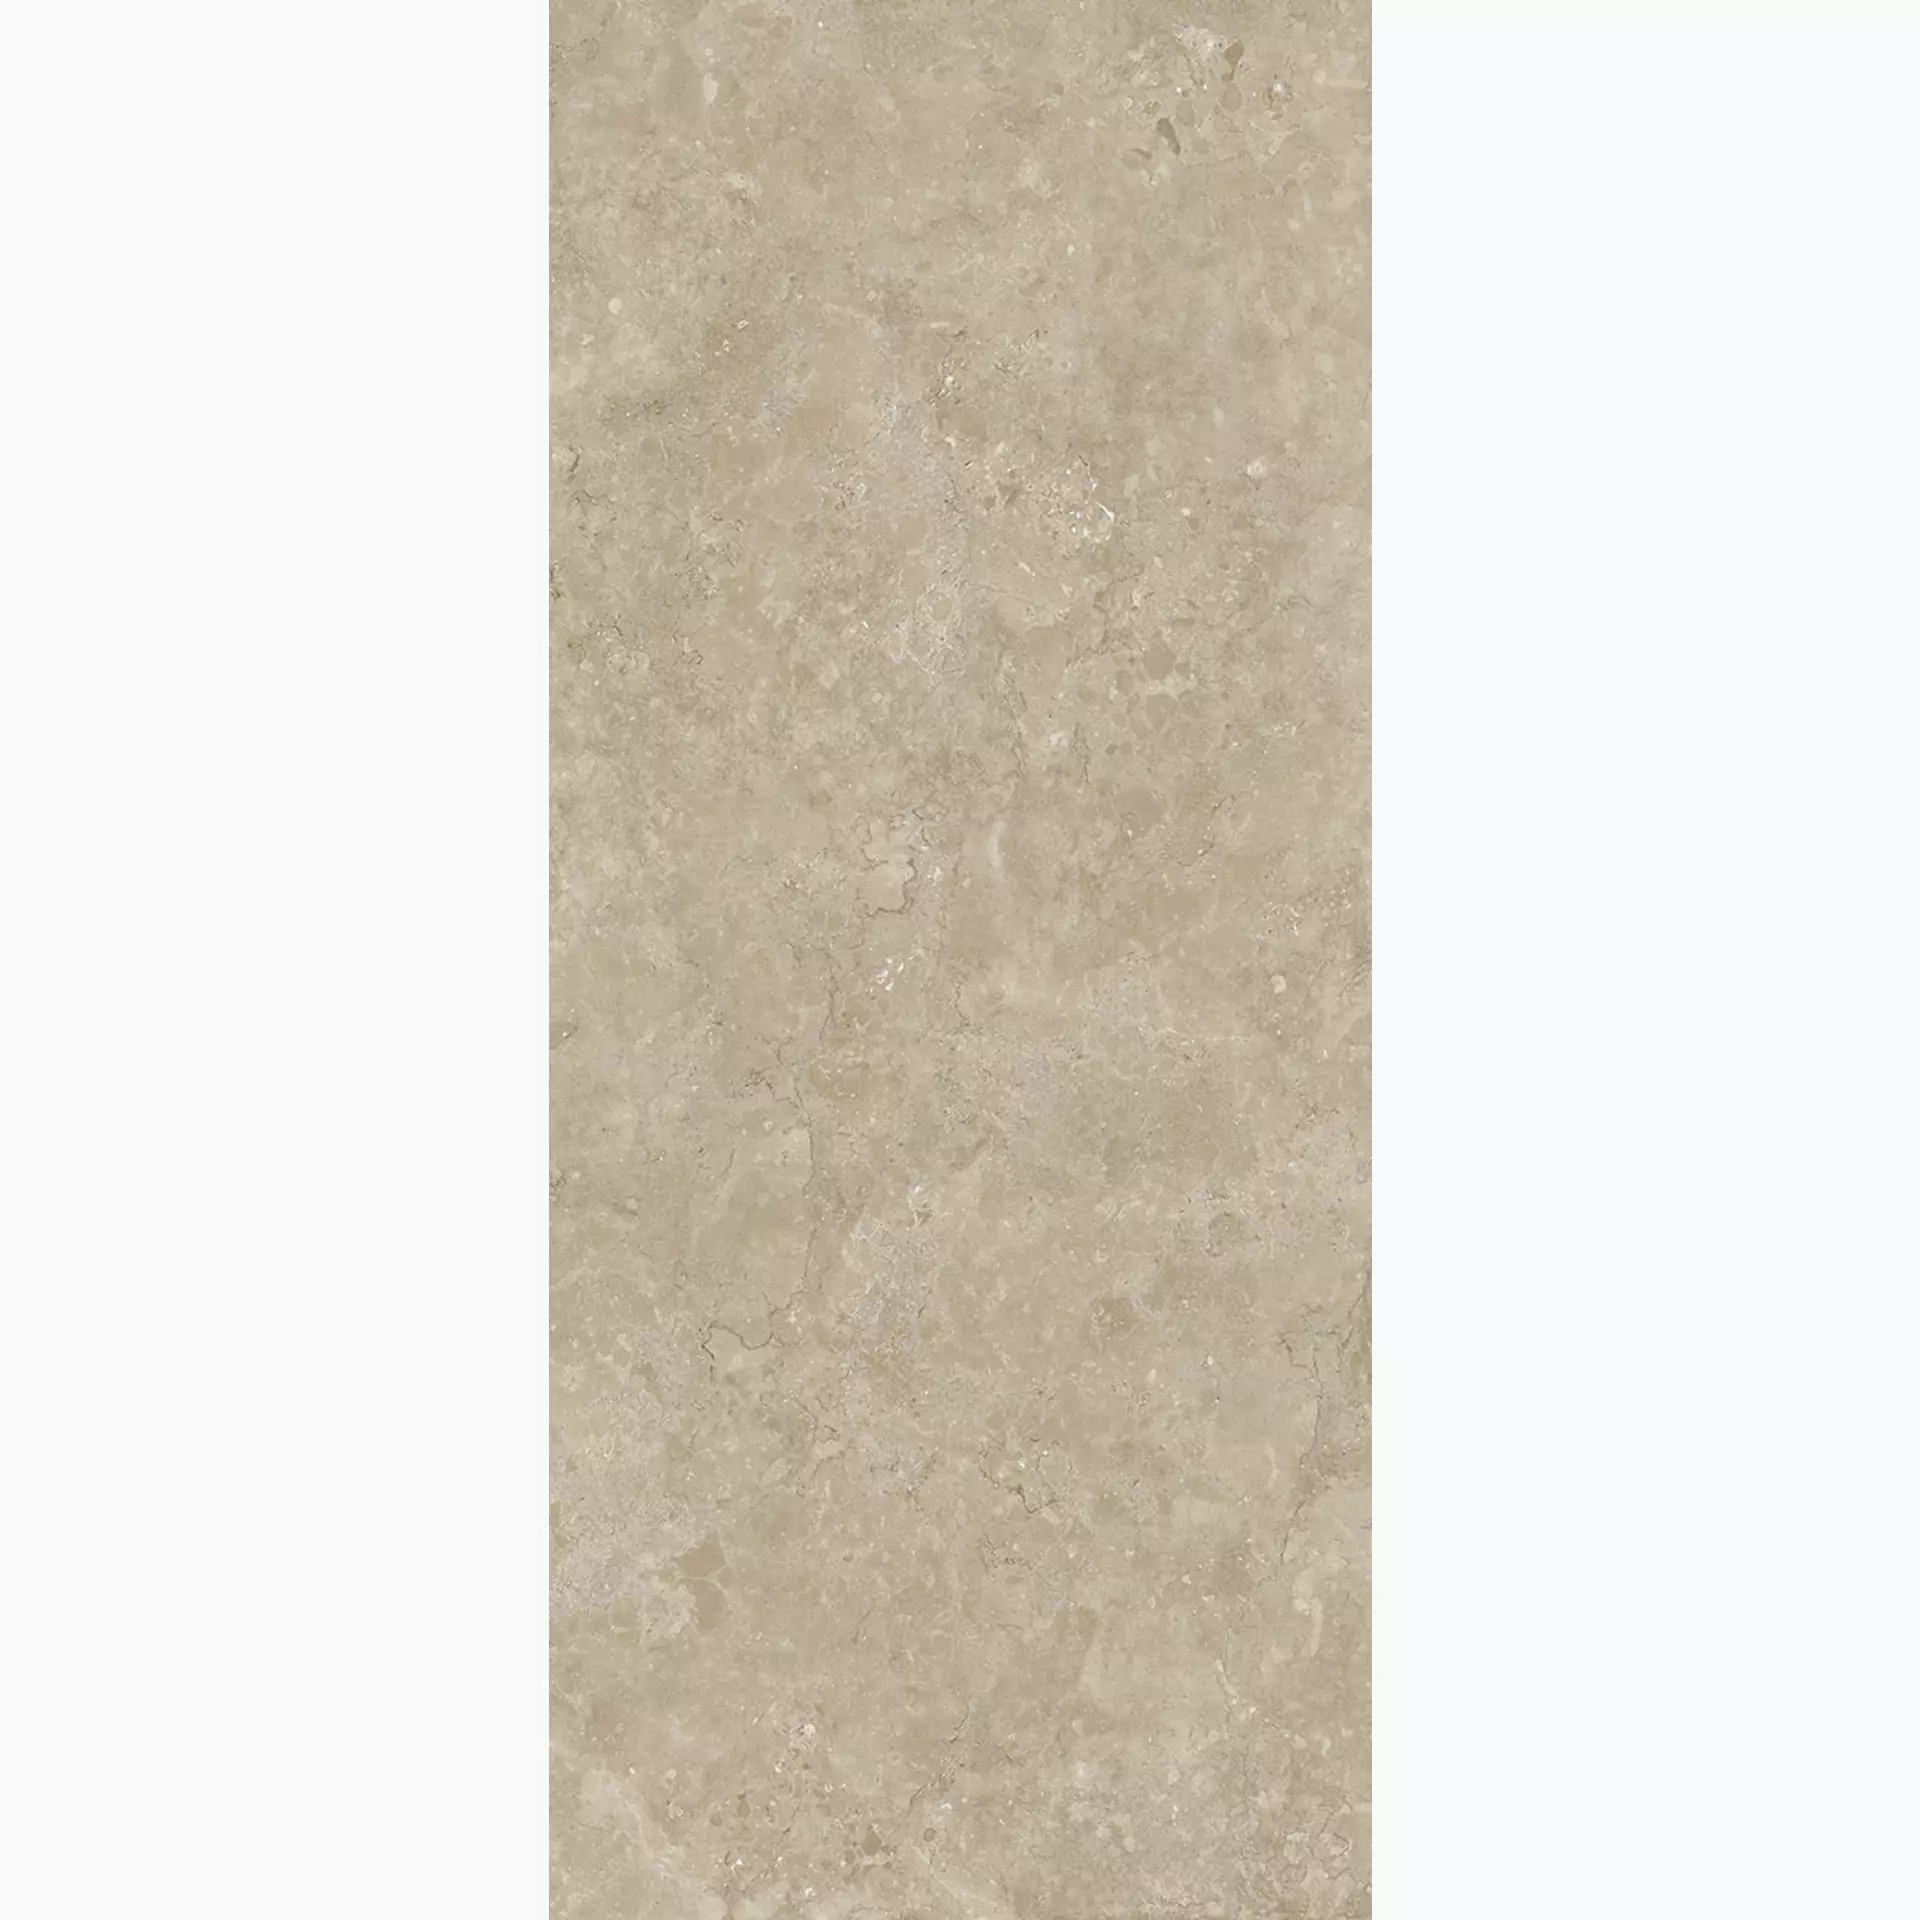 Coem Wide Gres Sand Naturale Lagos 0OS122R 120x120cm rectified 6mm